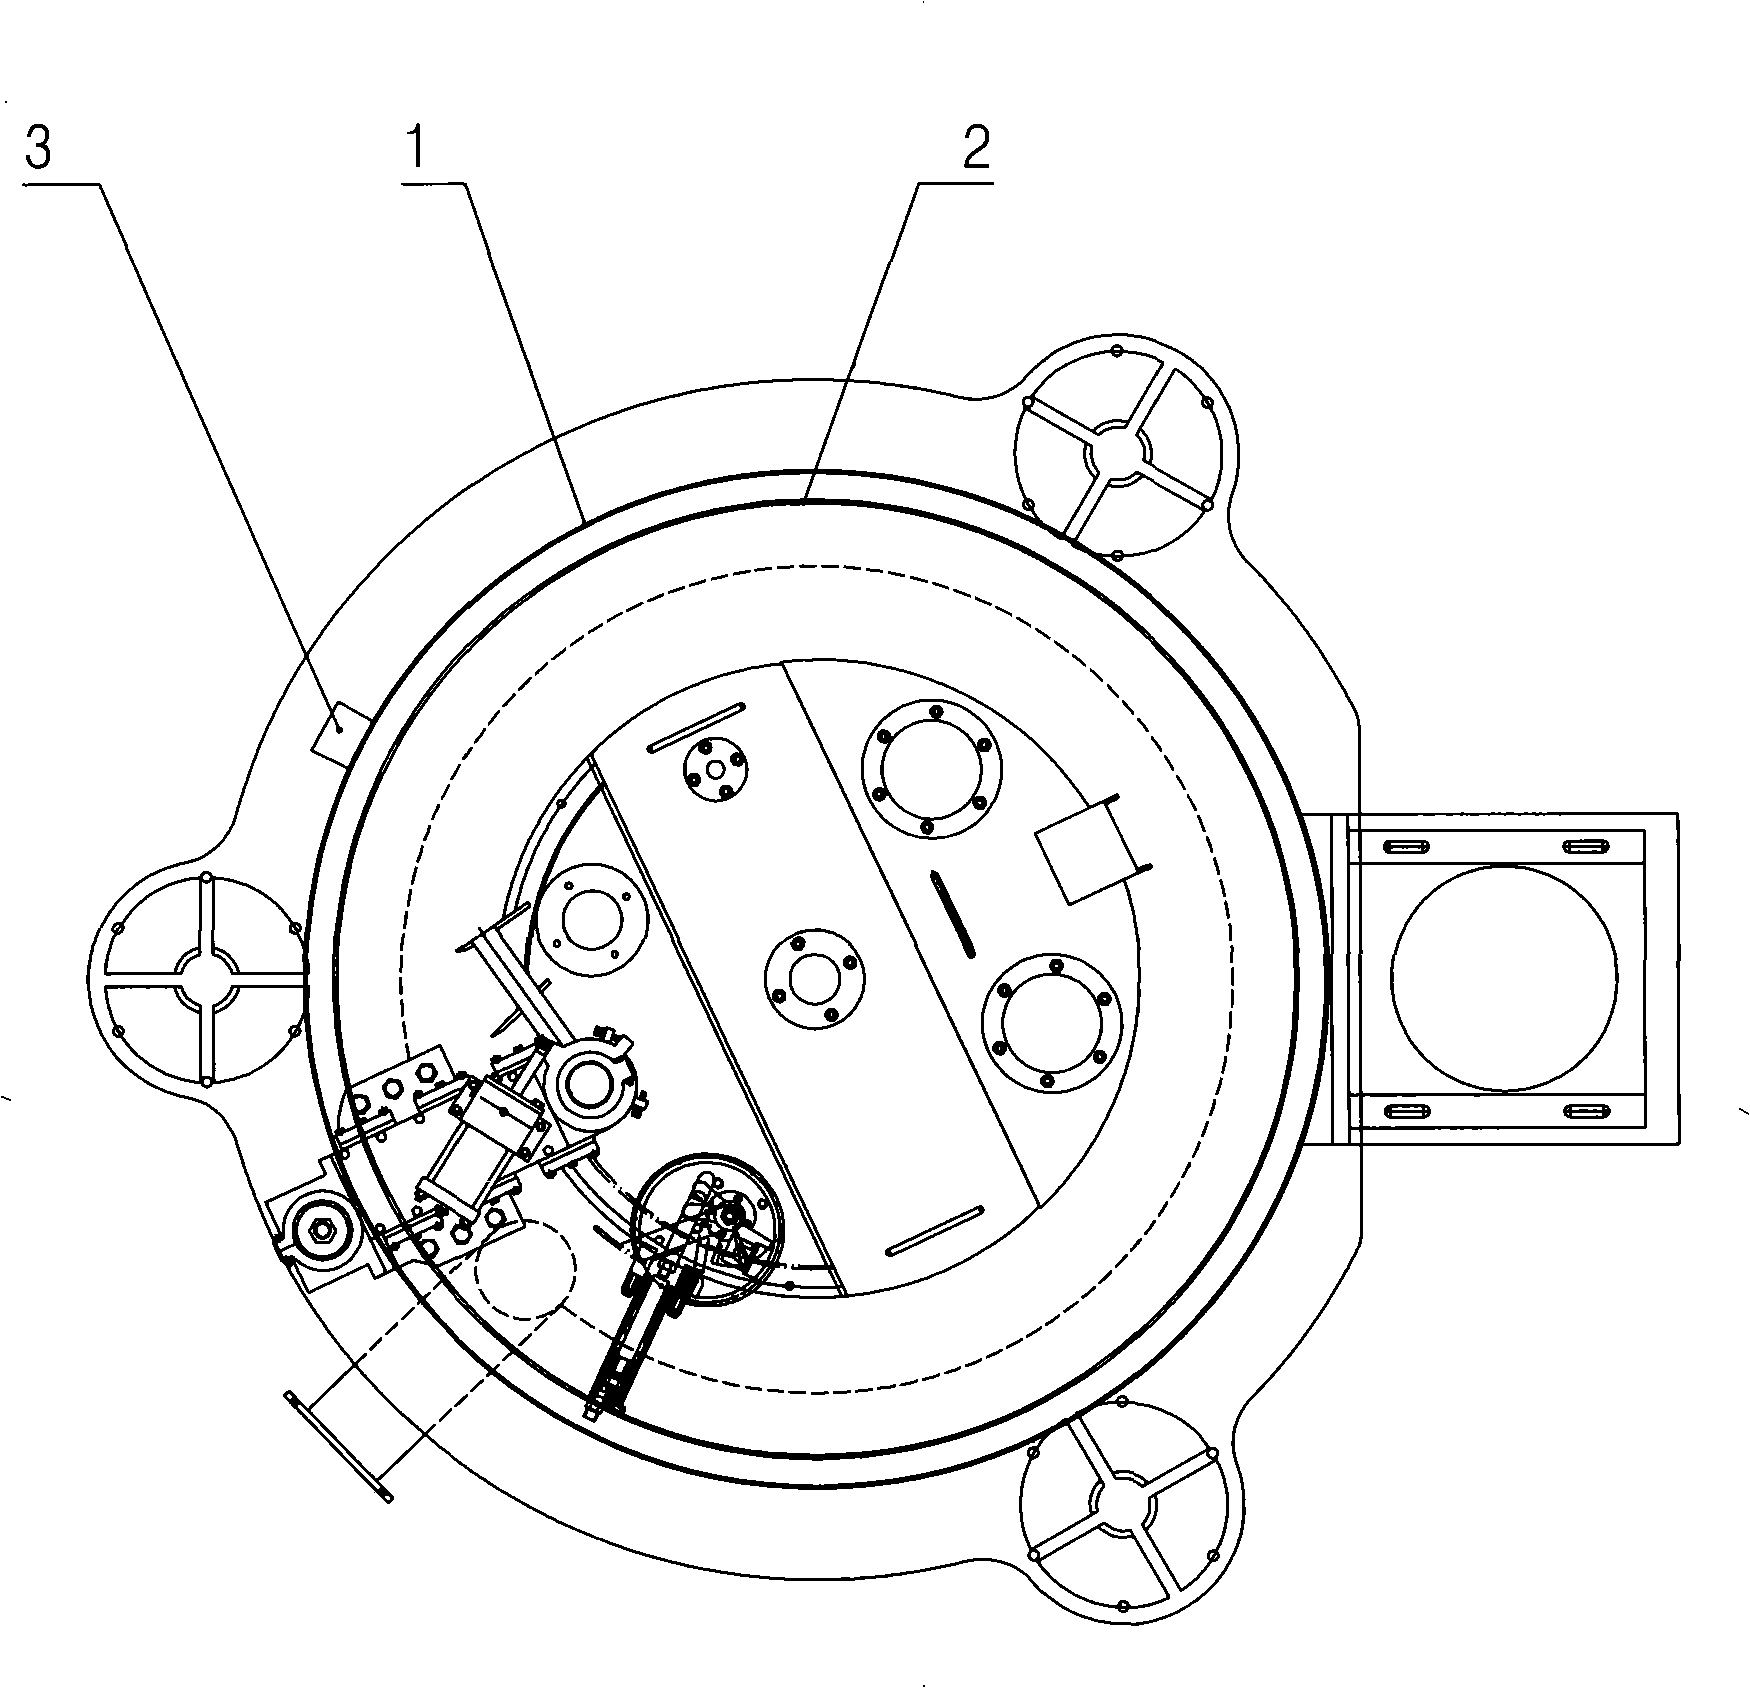 Control device of full-automatic lower discharging centrifuge